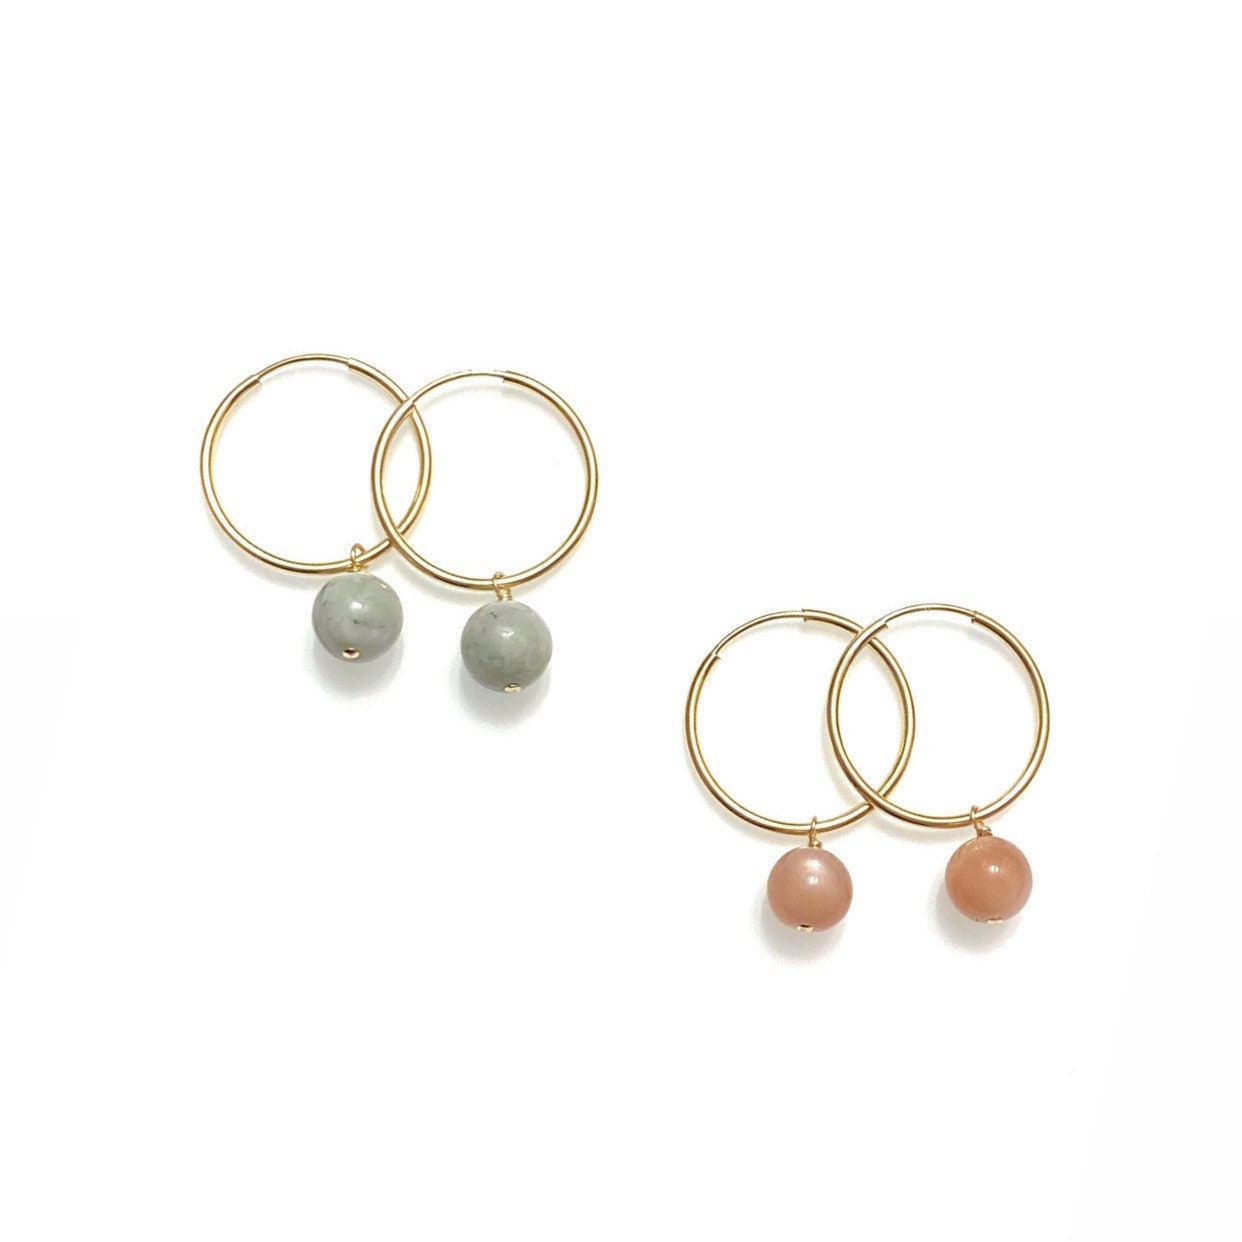 Burmese jade and peach moonstone charm hoops (tarnish resistant, 14K gold-filled or sterling silver)